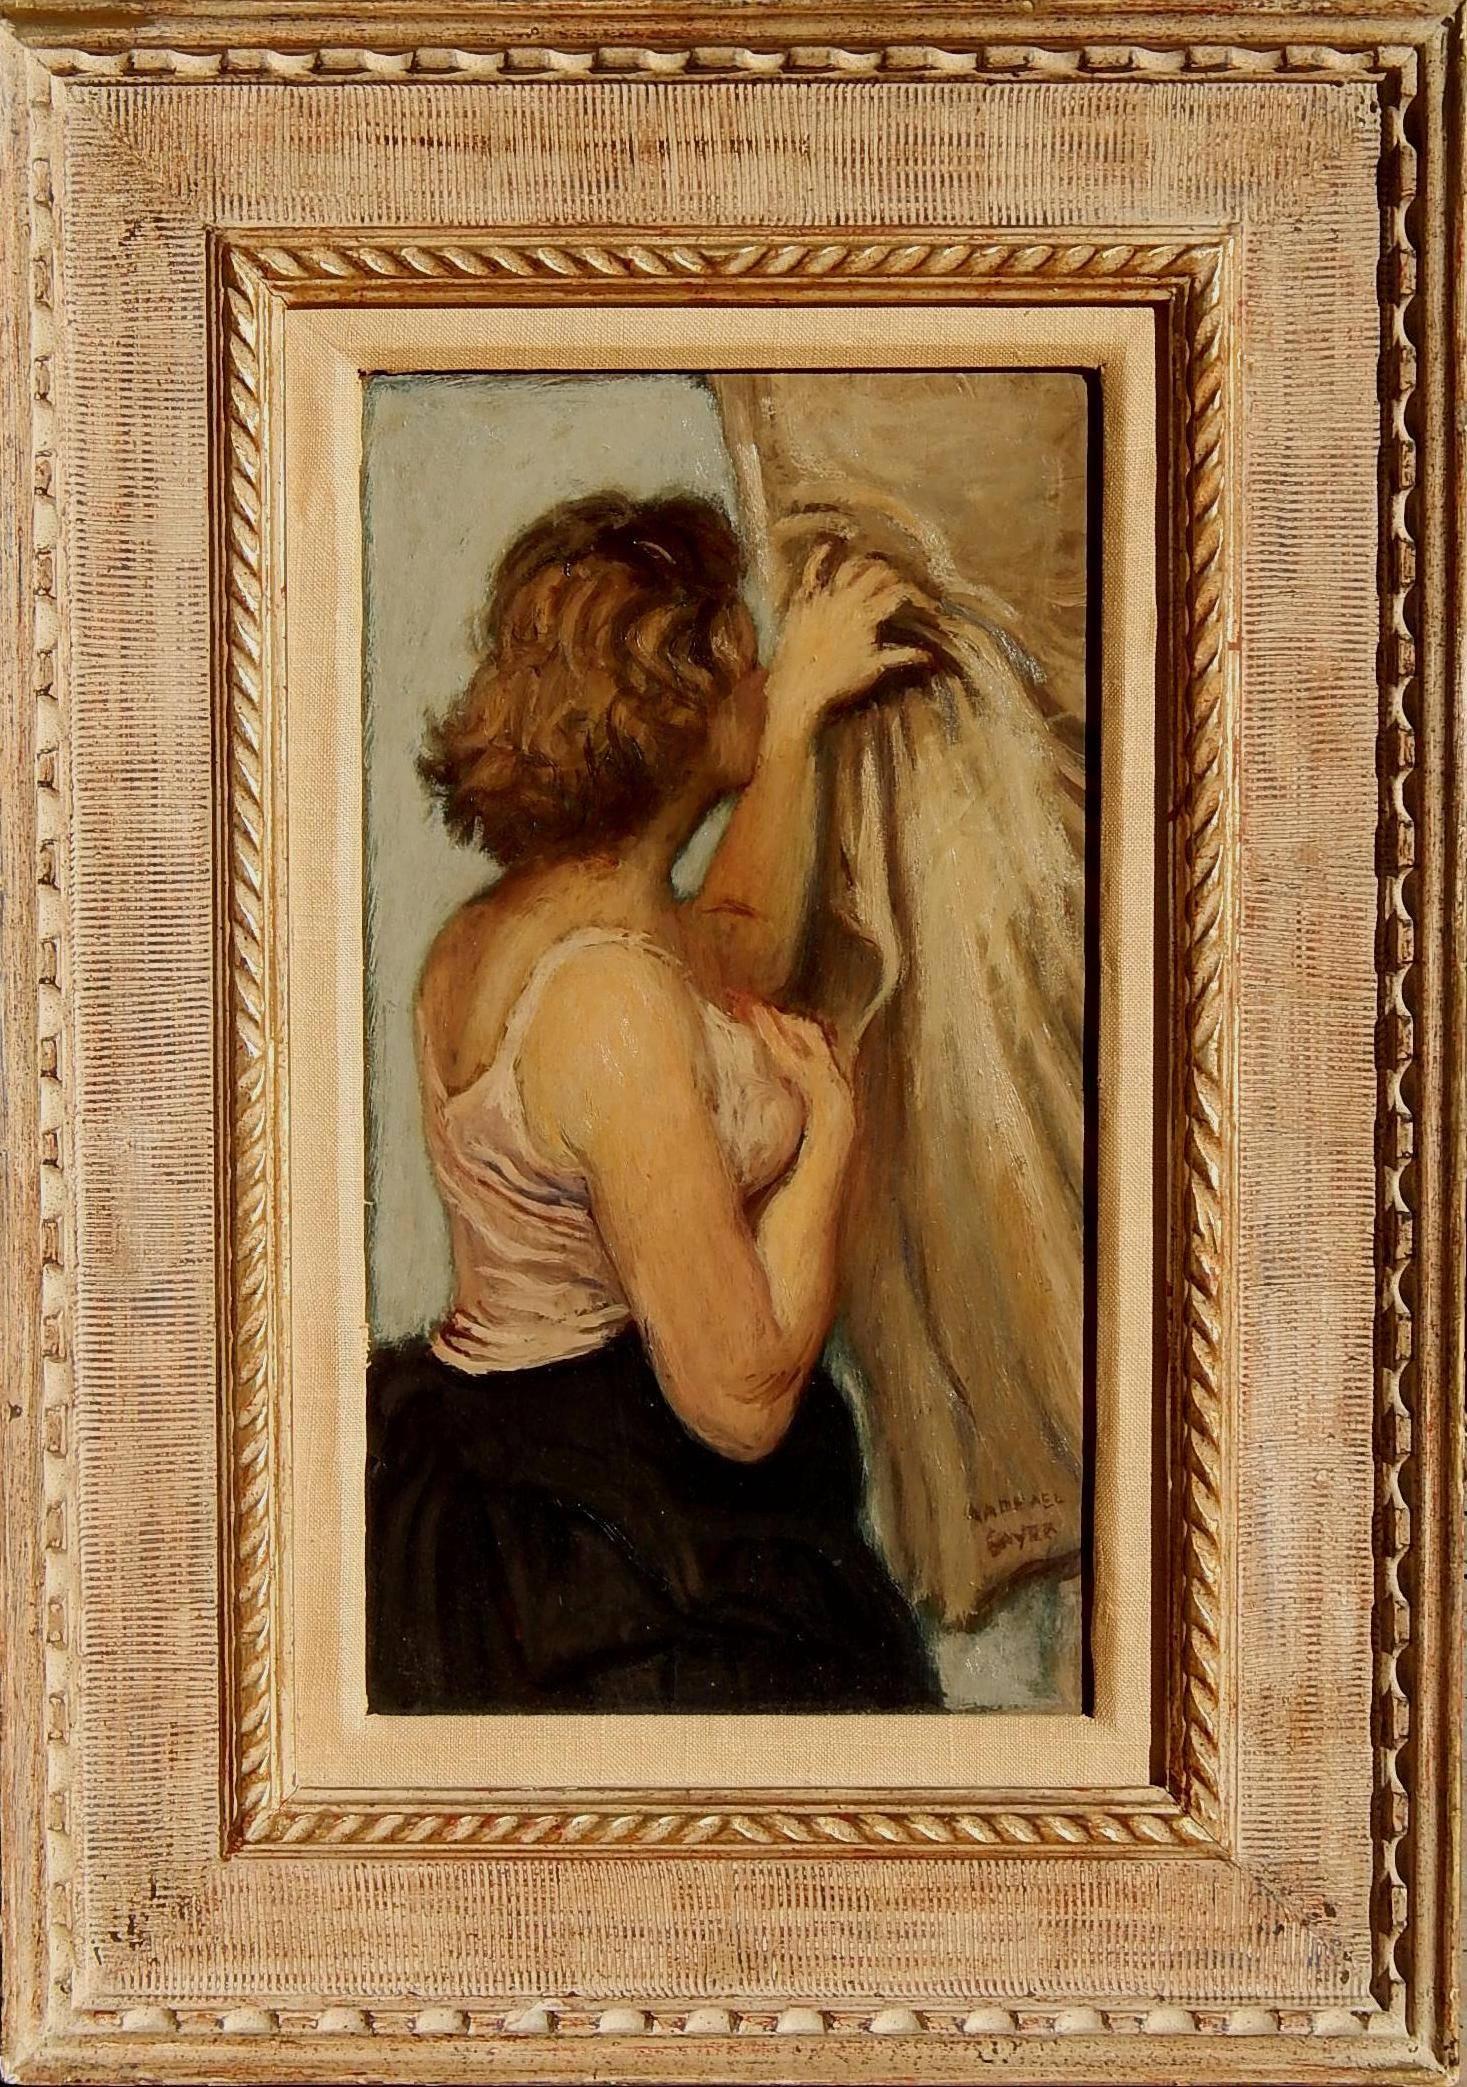 This is a beautiful oil painting by social realist Raphael Soyer (1899-1987)
It is in excellent condition and has a remnant of an Associated American
Artists label on the verso.
It measures 16 x 9 inches image size. Frame size is: 24 x 17